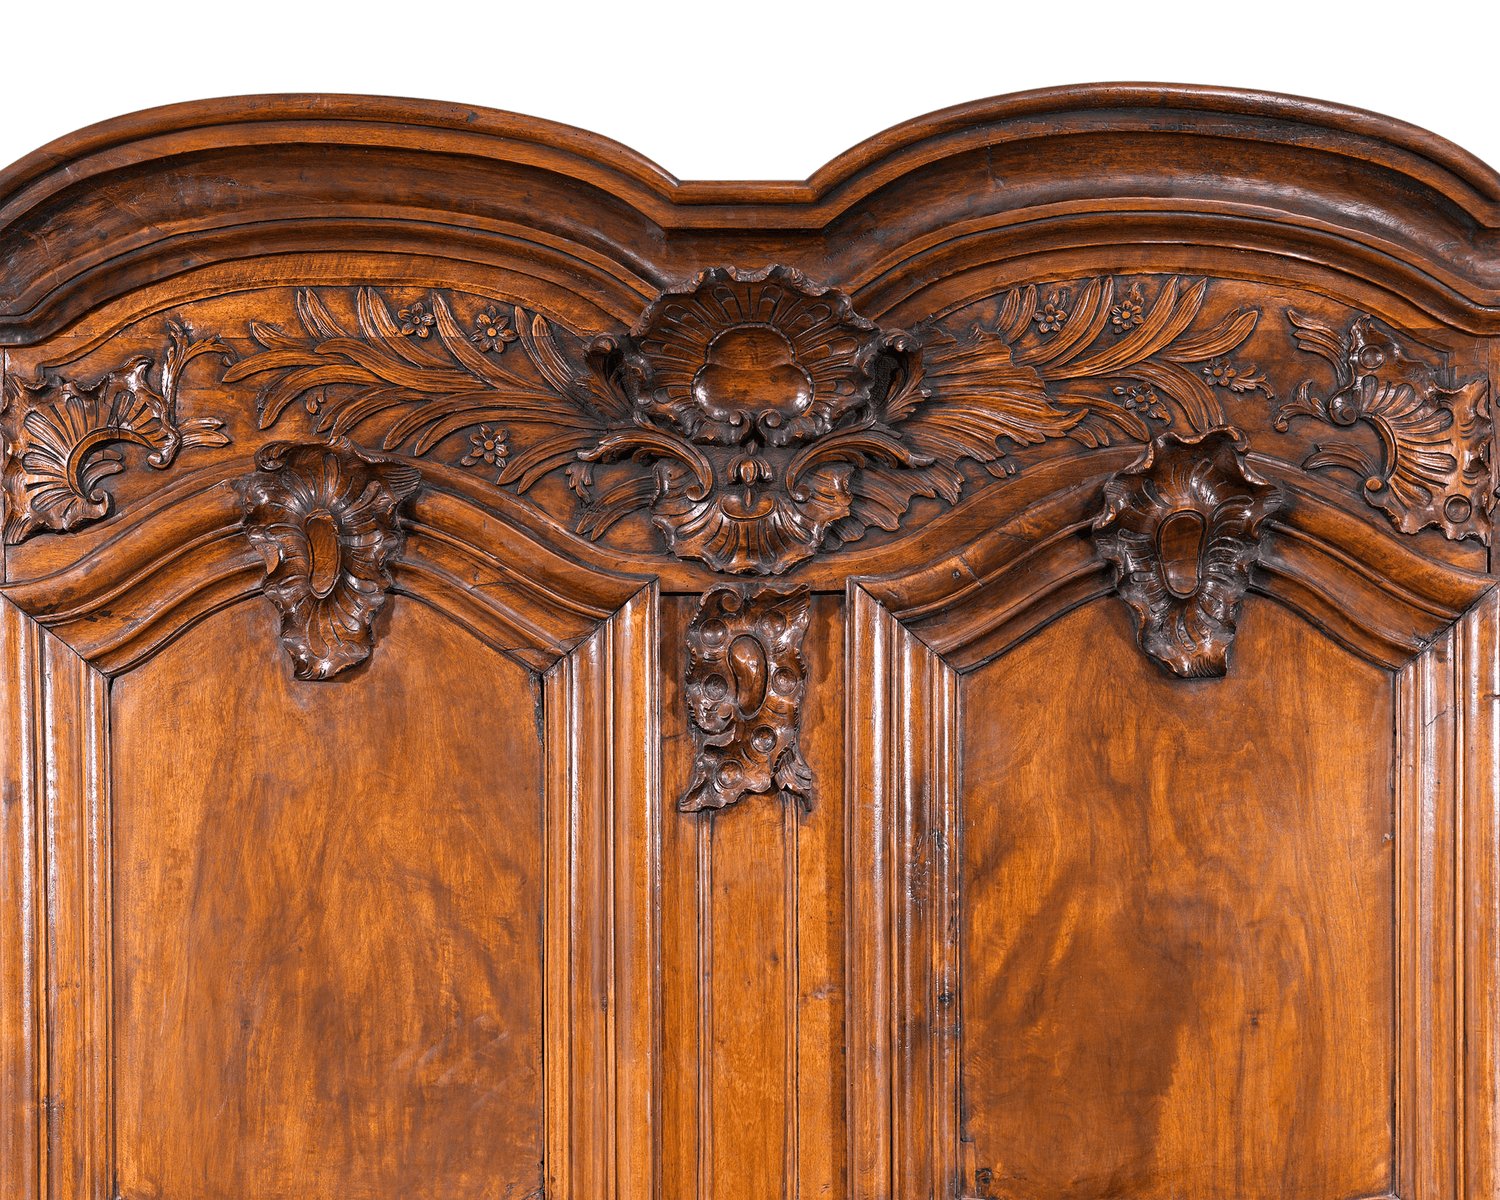 Robust rocaille carved flourishes add to the grandeur of this majestic cabinet